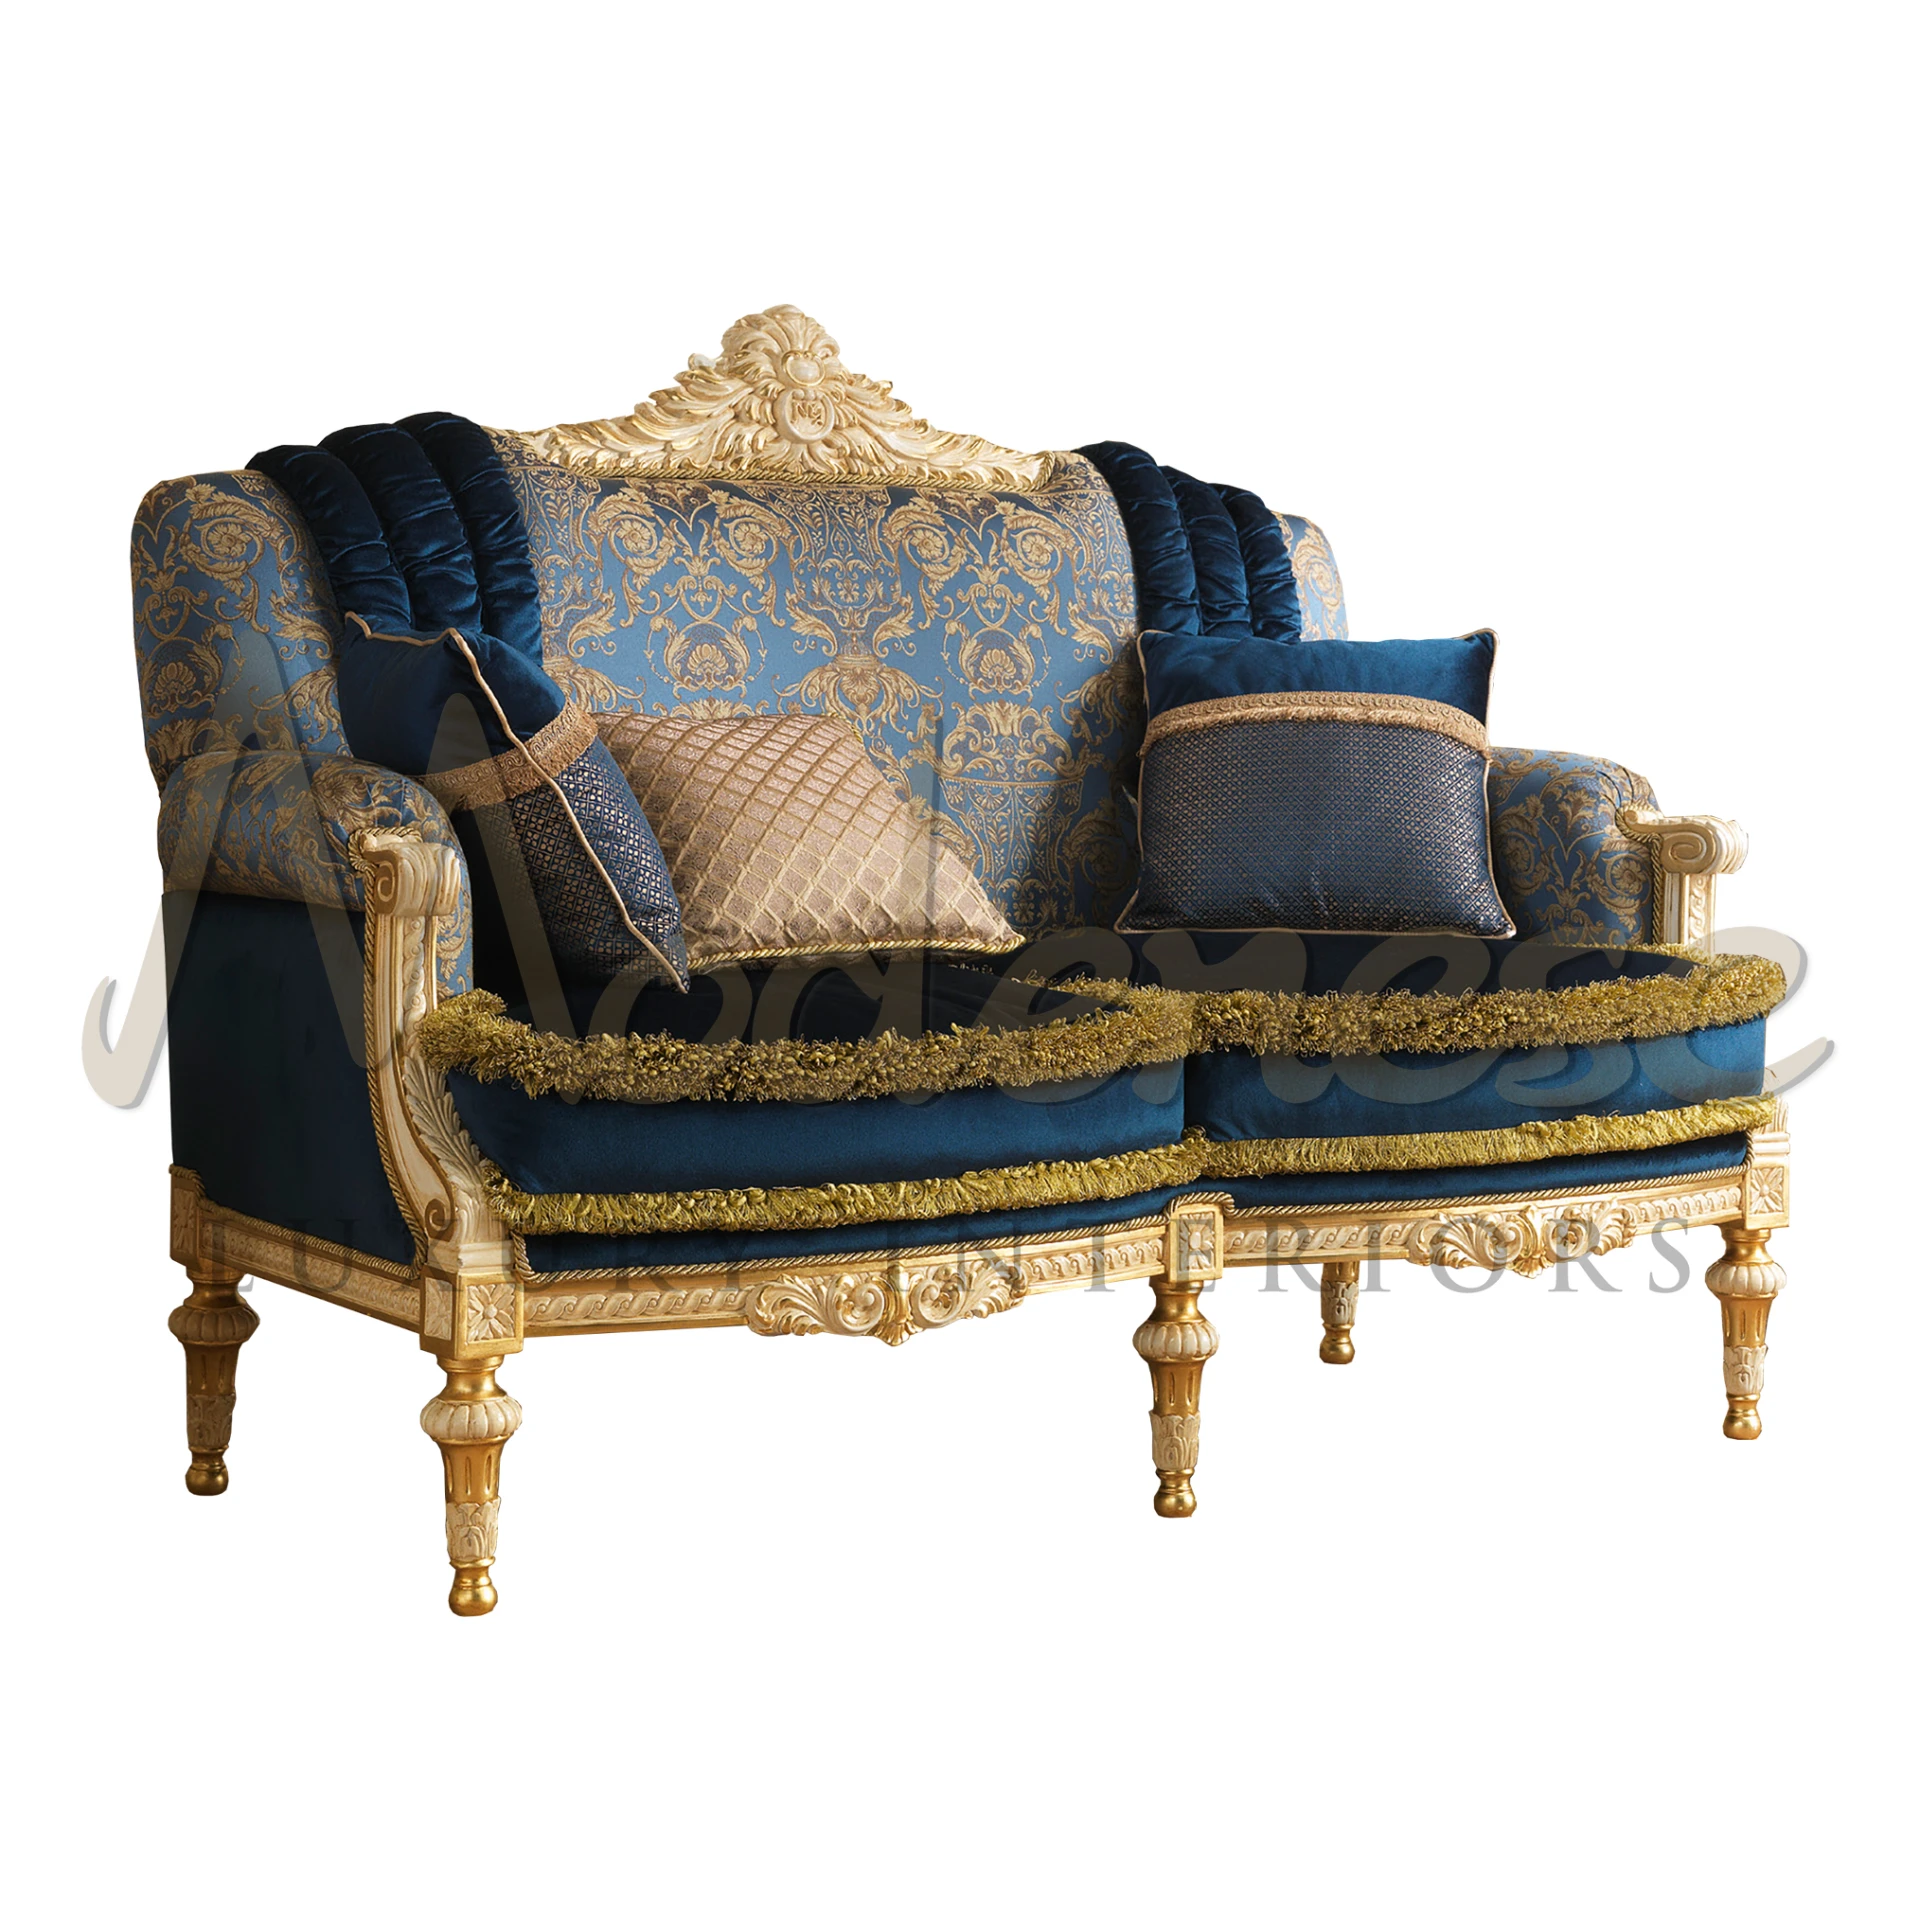 Crafted with Italian precision and attention to detail, this sofa epitomizes opulence and sophistication.